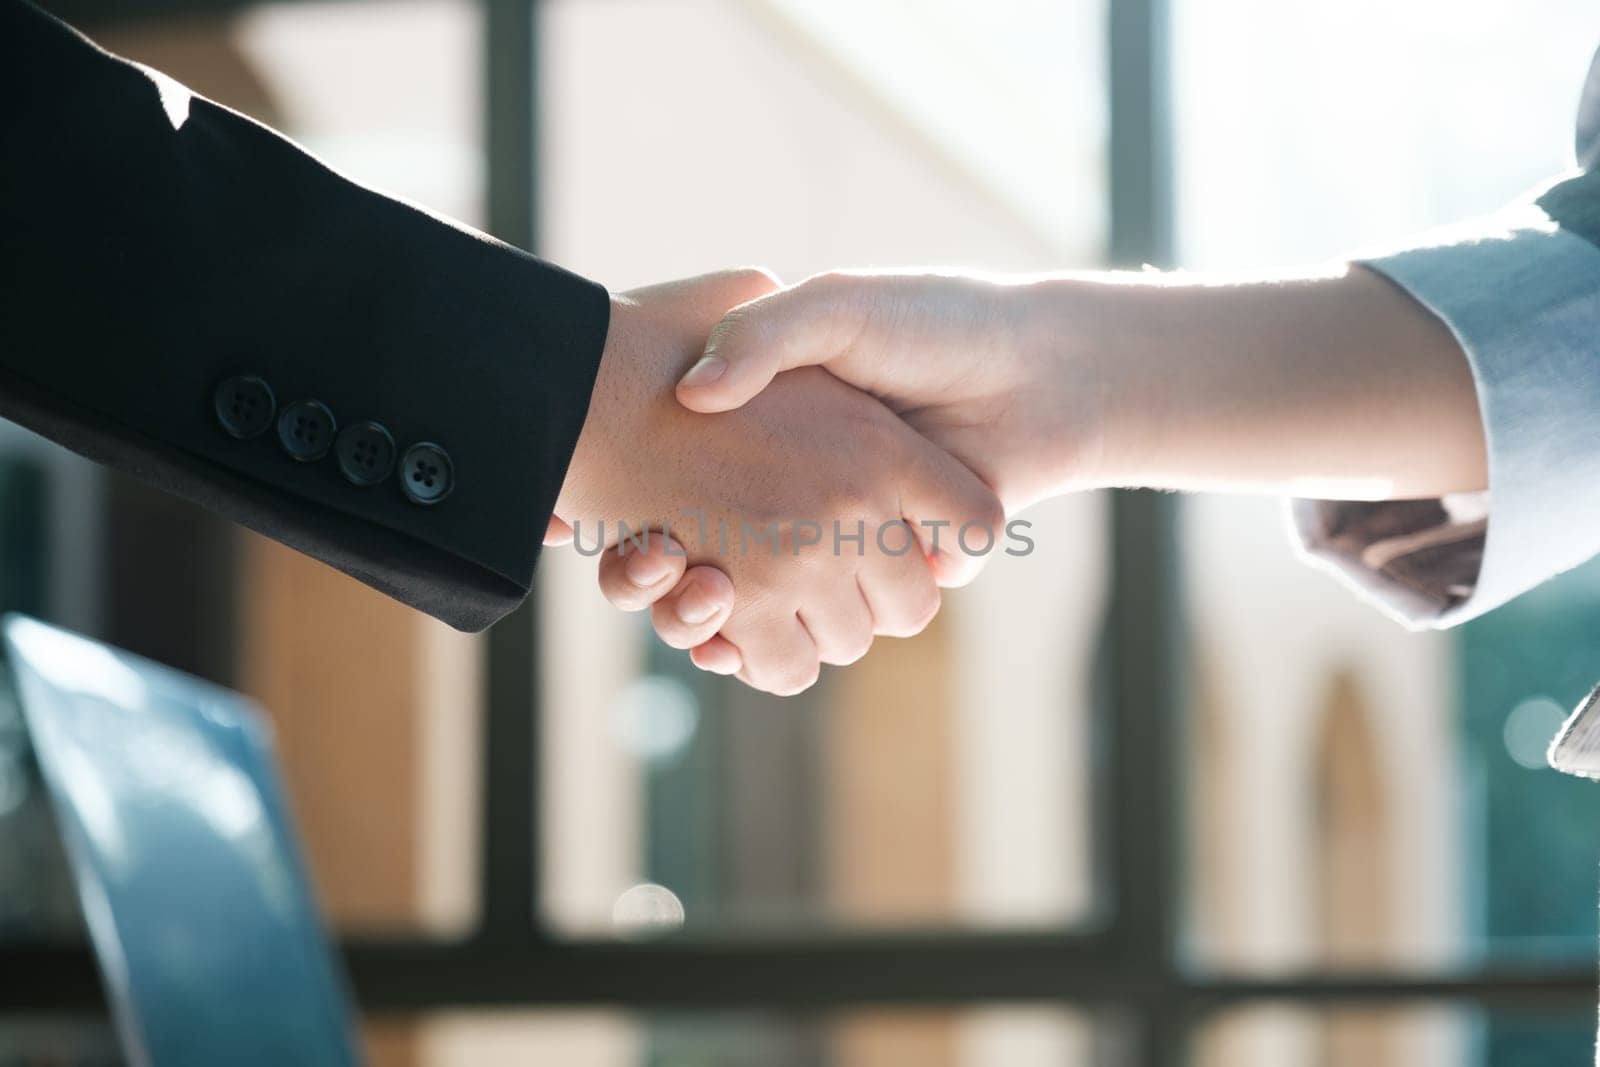 Two people shaking hands in a business setting. Scene is professional and formal. The handshake symbolizes agreement and trust between the two individuals